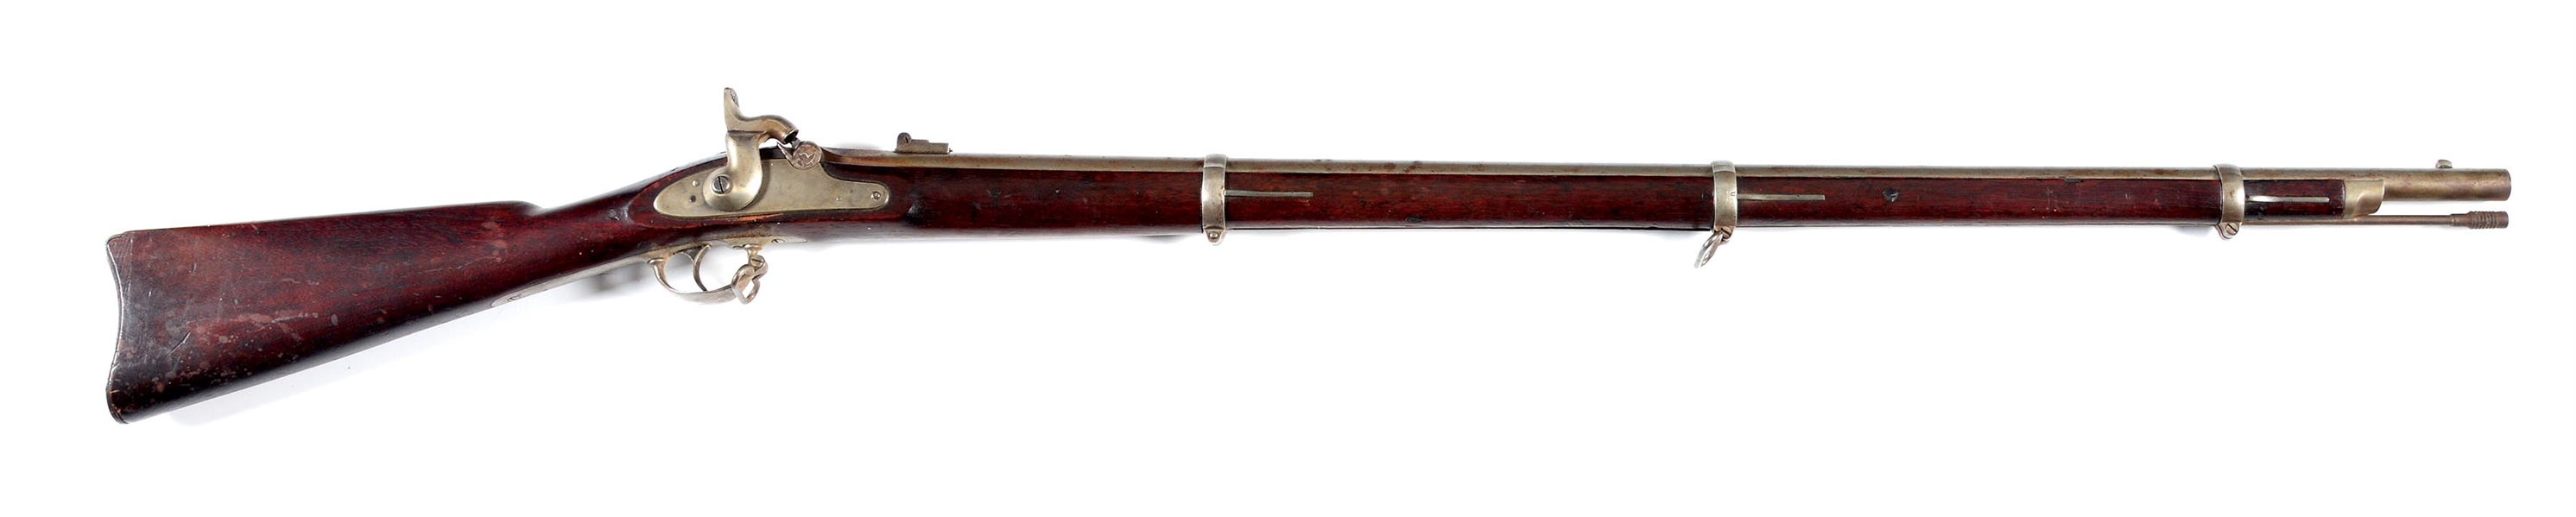 (A) GAR MARKED US M1863 PERCUSSION RIFLE MUSKET. 